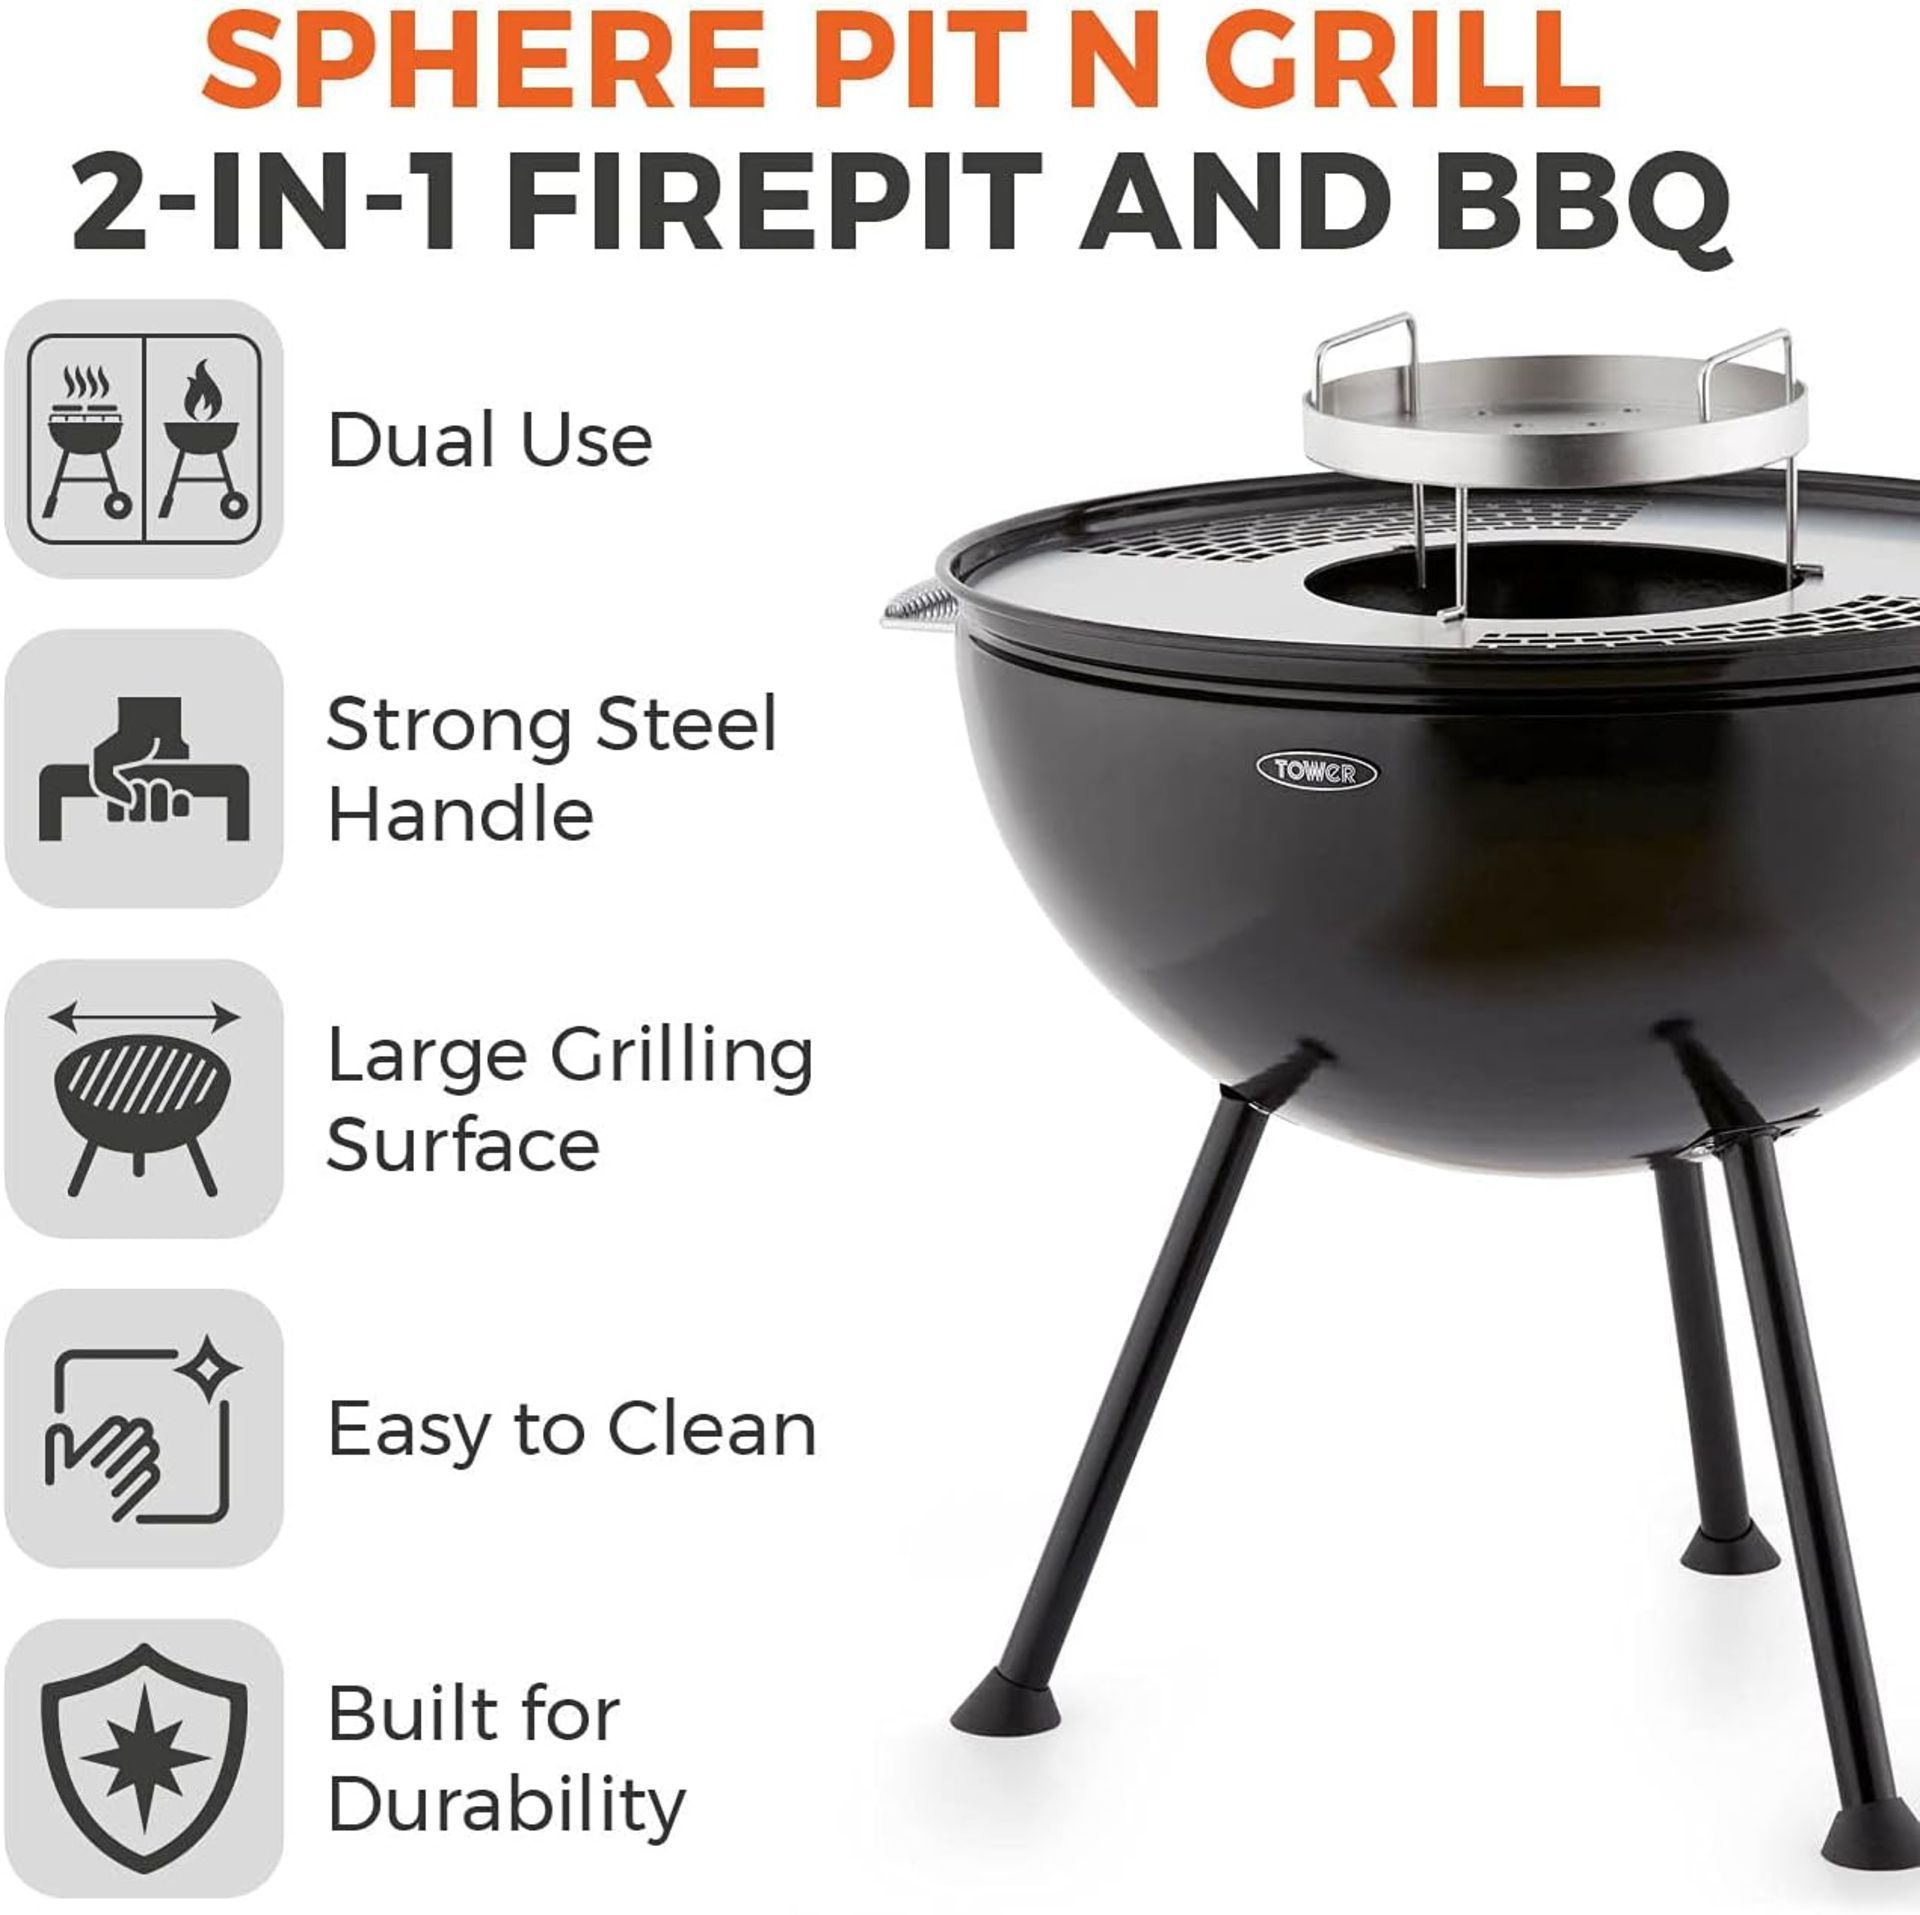 Brand New Tower Sphere Fire Pit and BBQ Grill, Black, DUAL USE â€“ This multi-functional pit n grill - Image 4 of 4